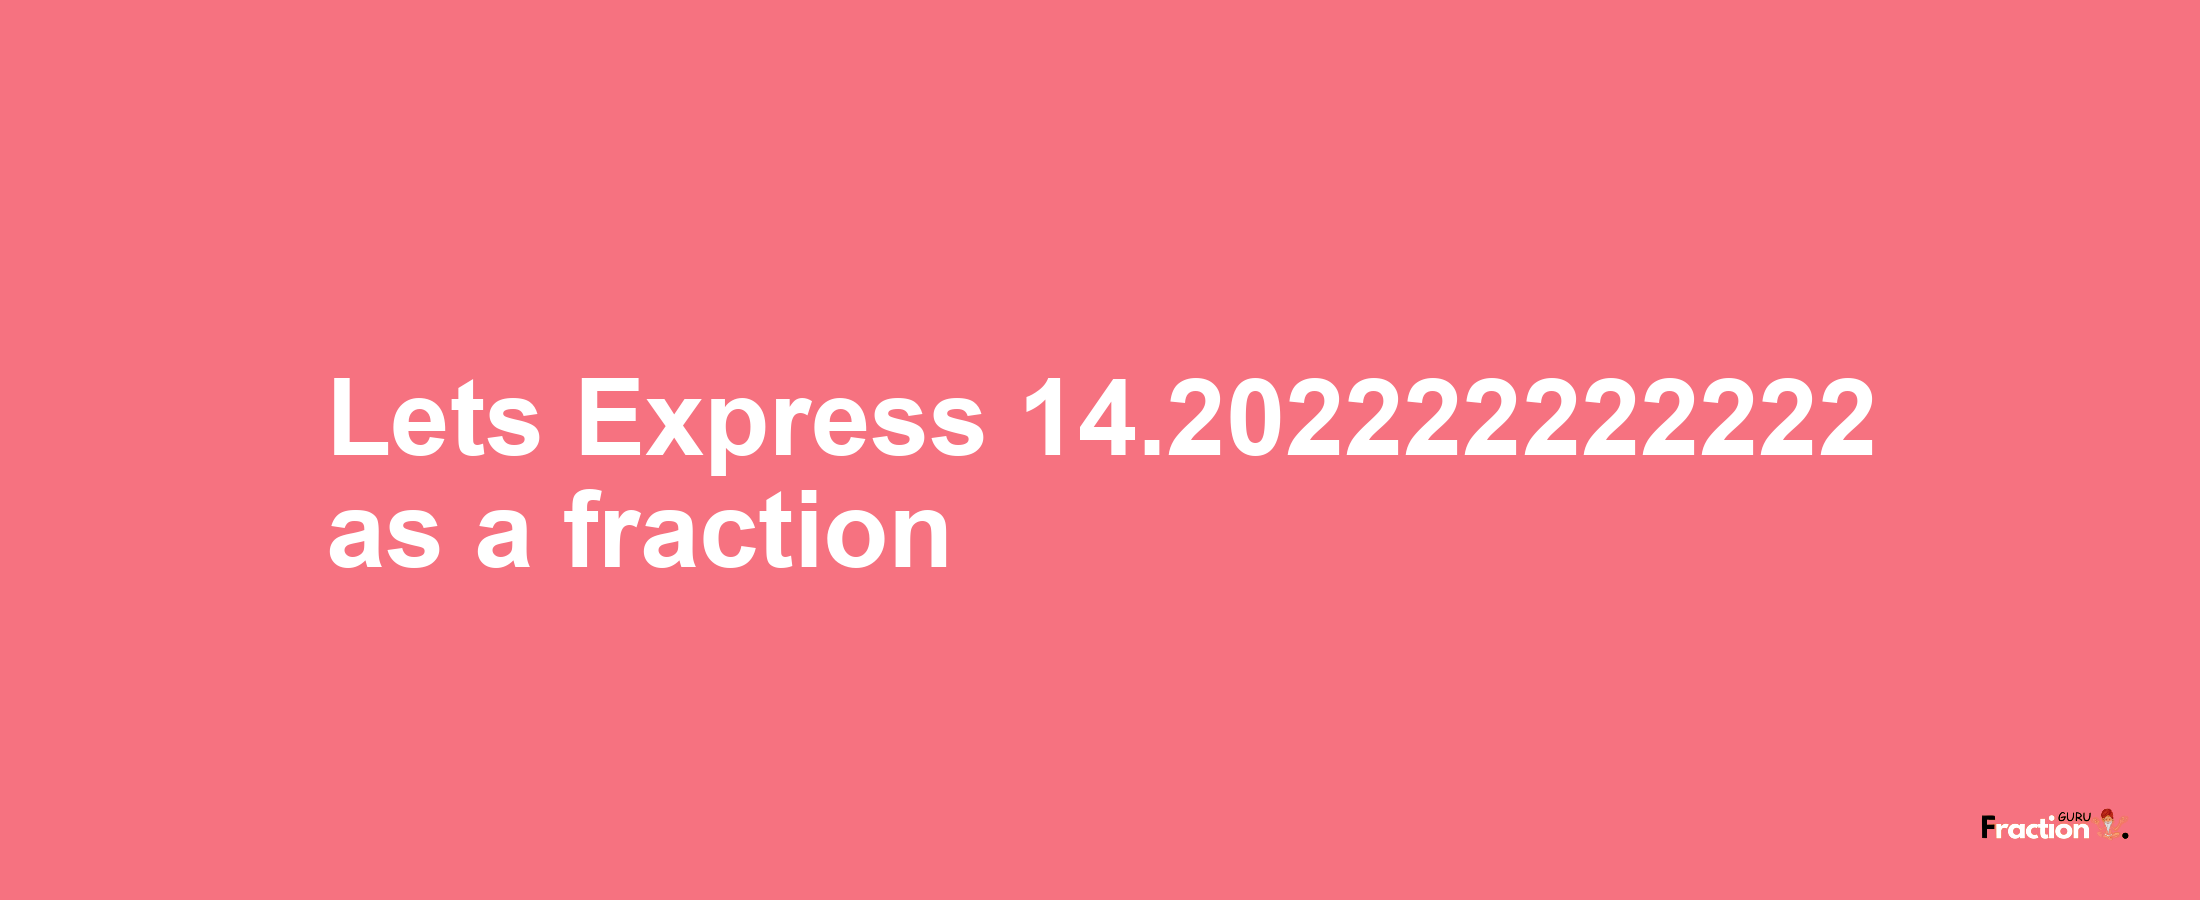 Lets Express 14.202222222222 as afraction